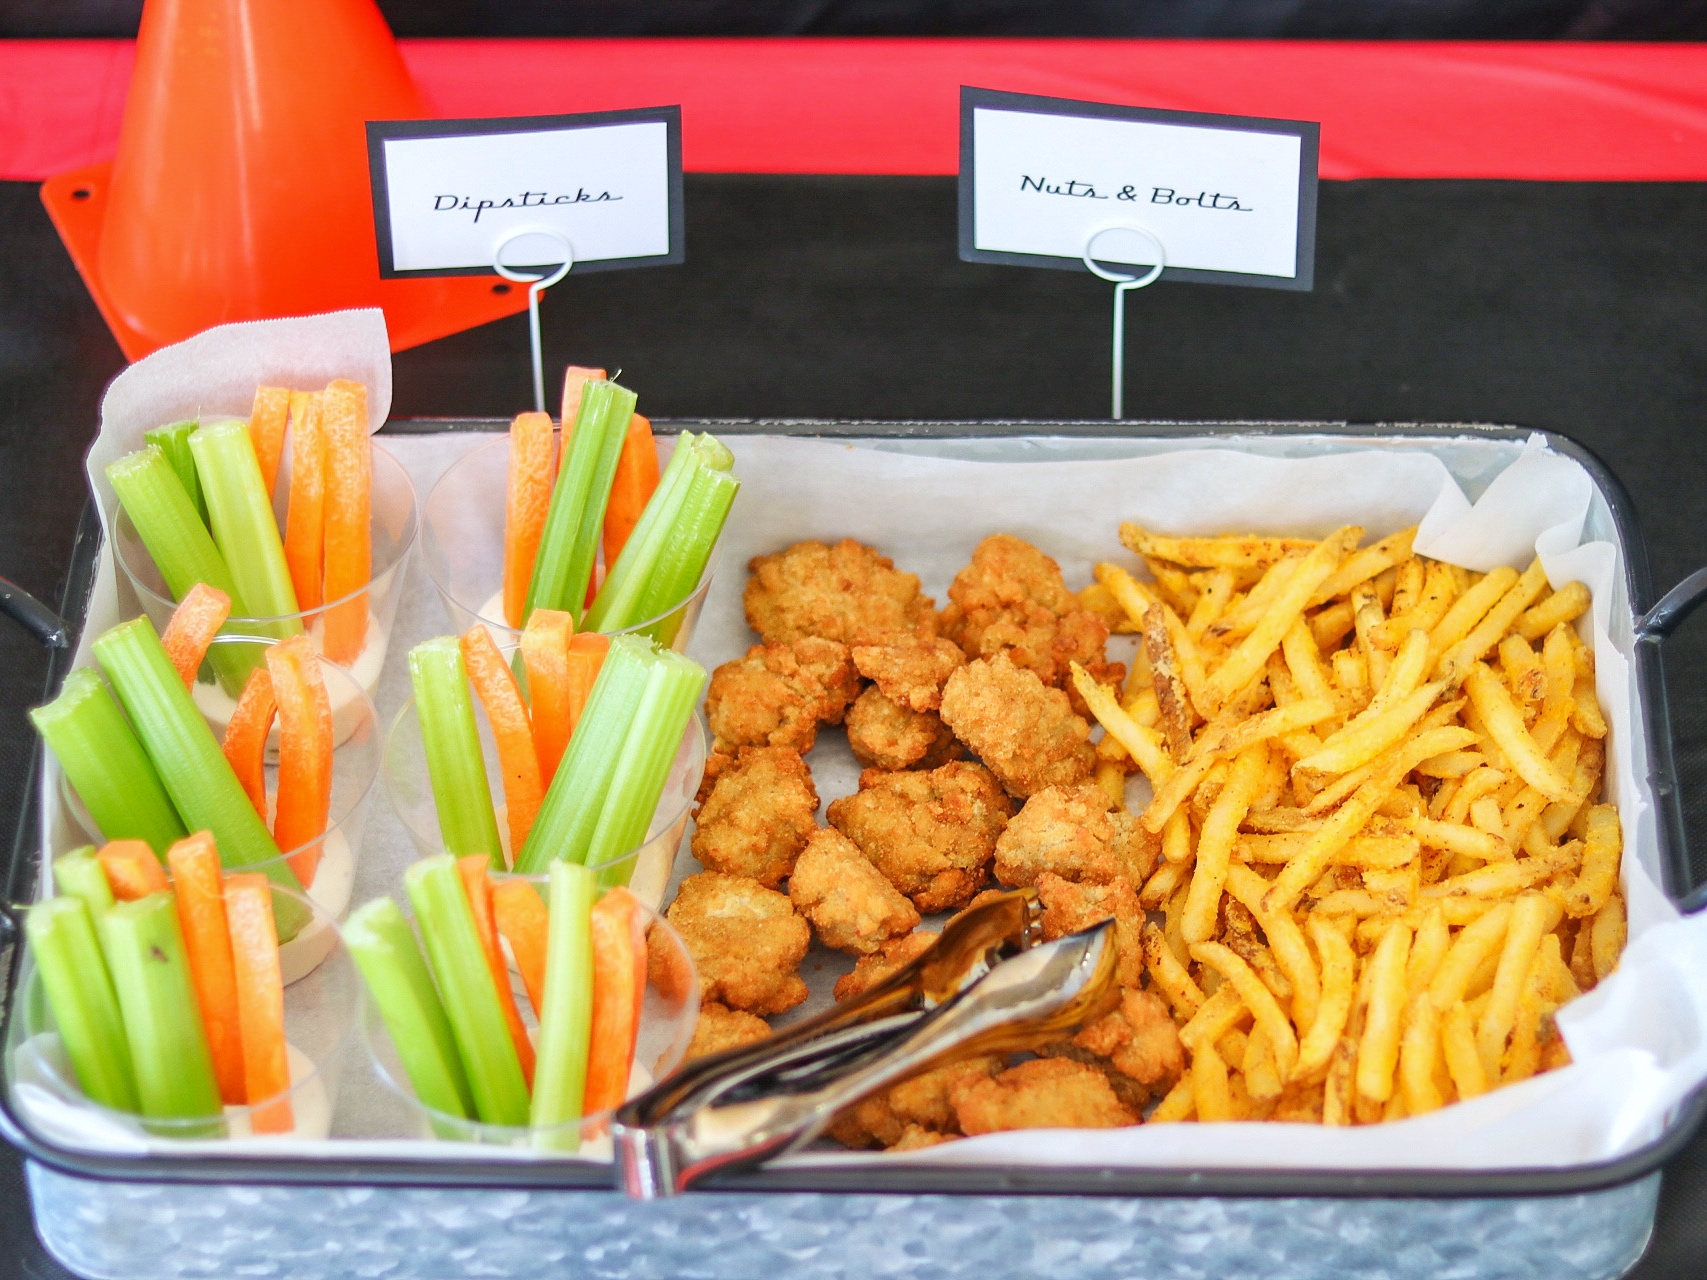 Disney Cars party food ideas: Dipsticks, Nuts & Bolts